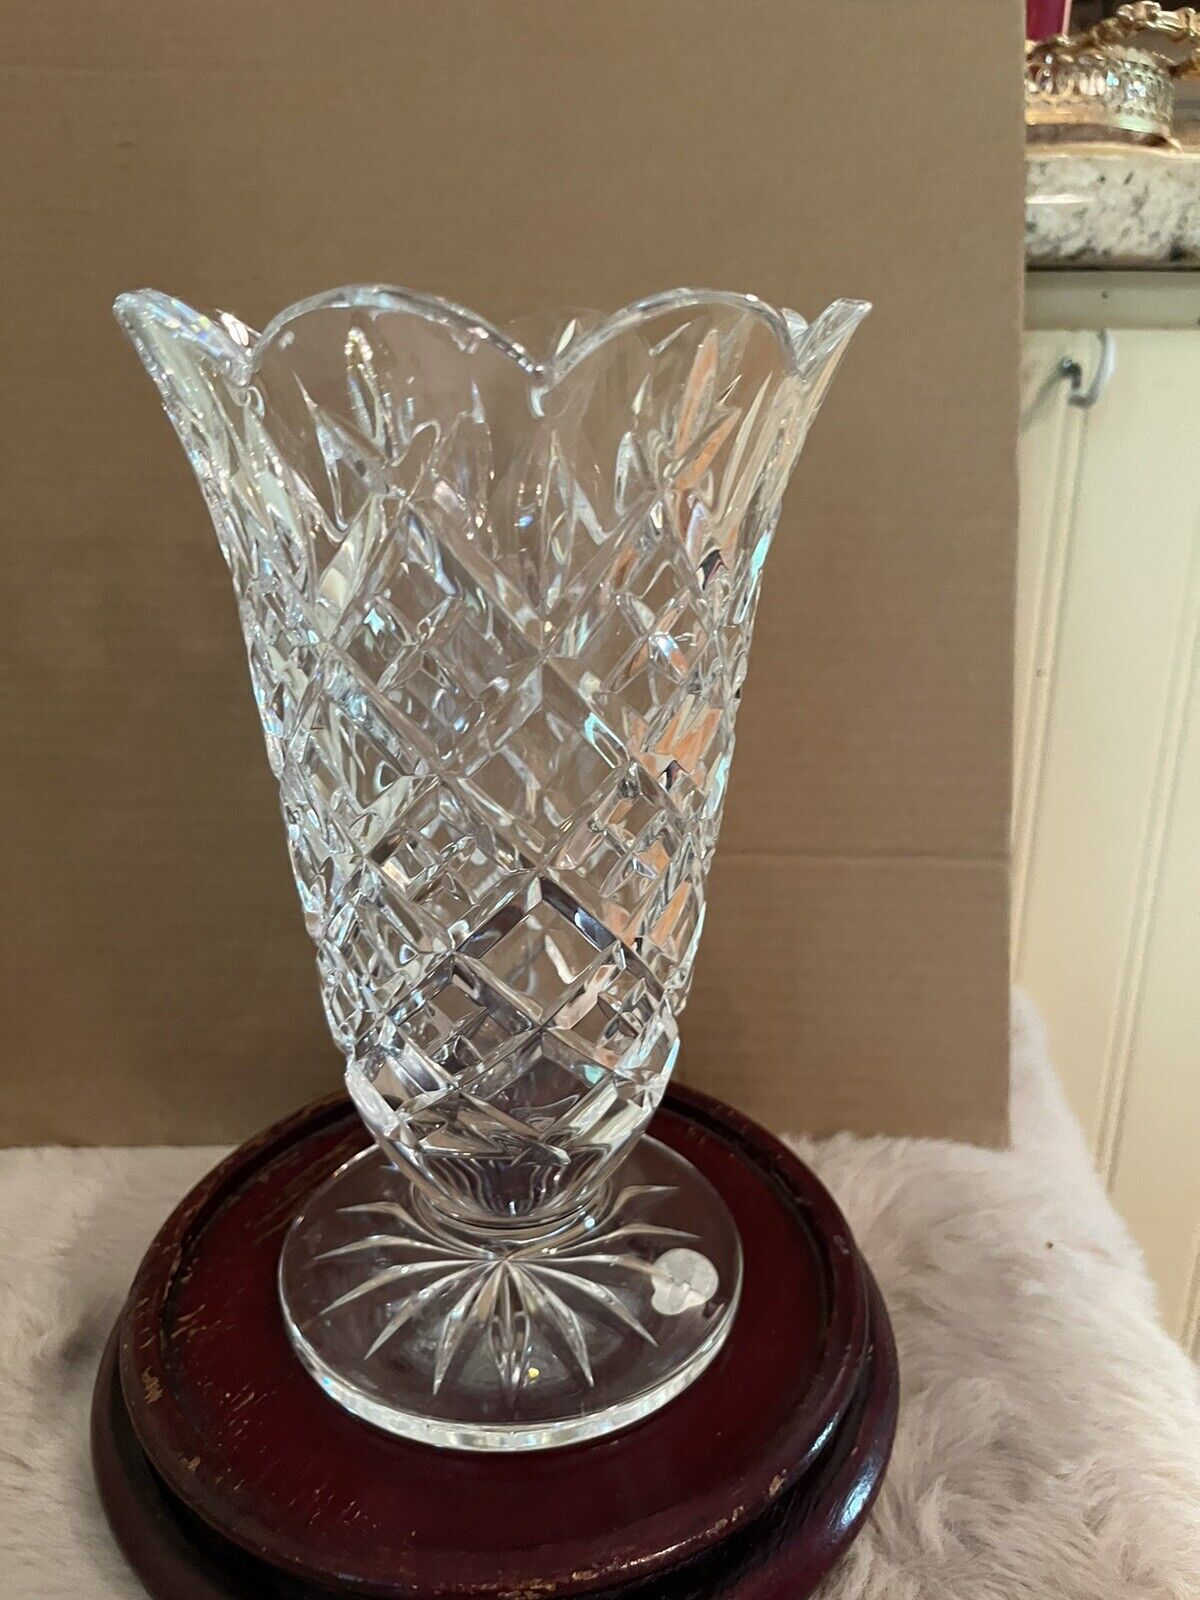 Waterford Crystal “8.5” 2007 Artisan Vase Made In Ireland New Without Box